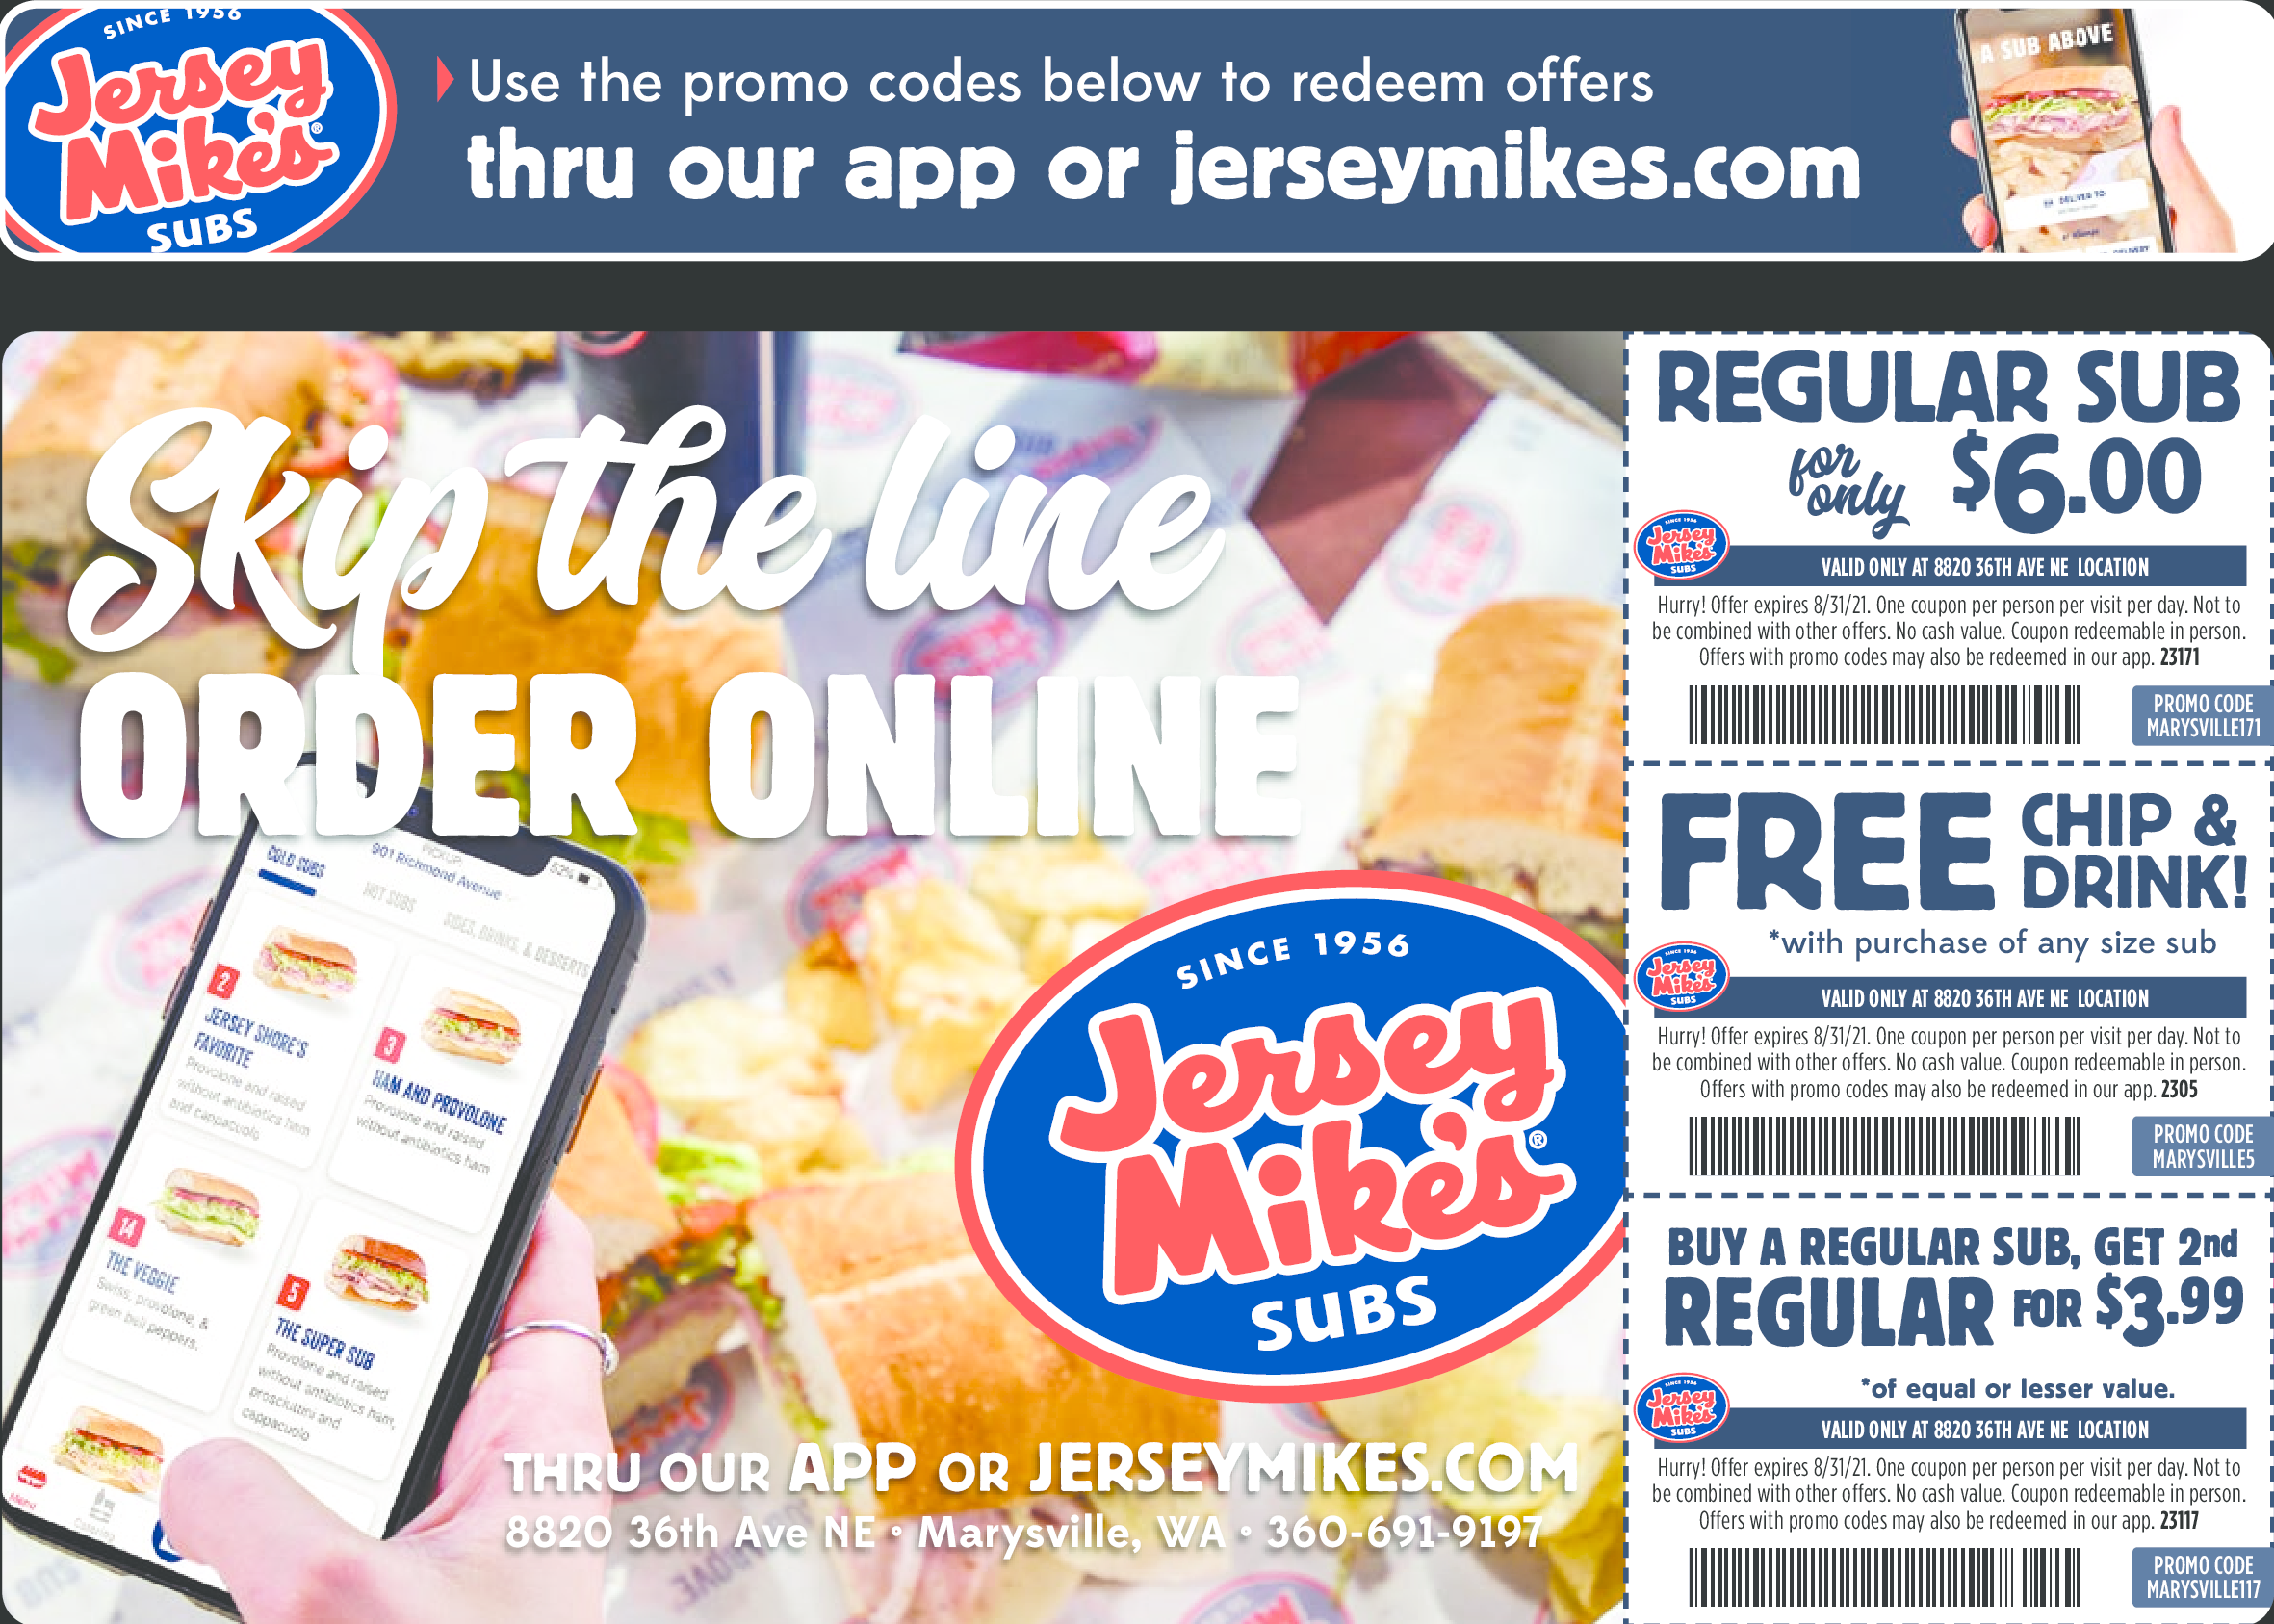 got-grocery-coupons-look-in-these-32-places-for-the-best-ones-the